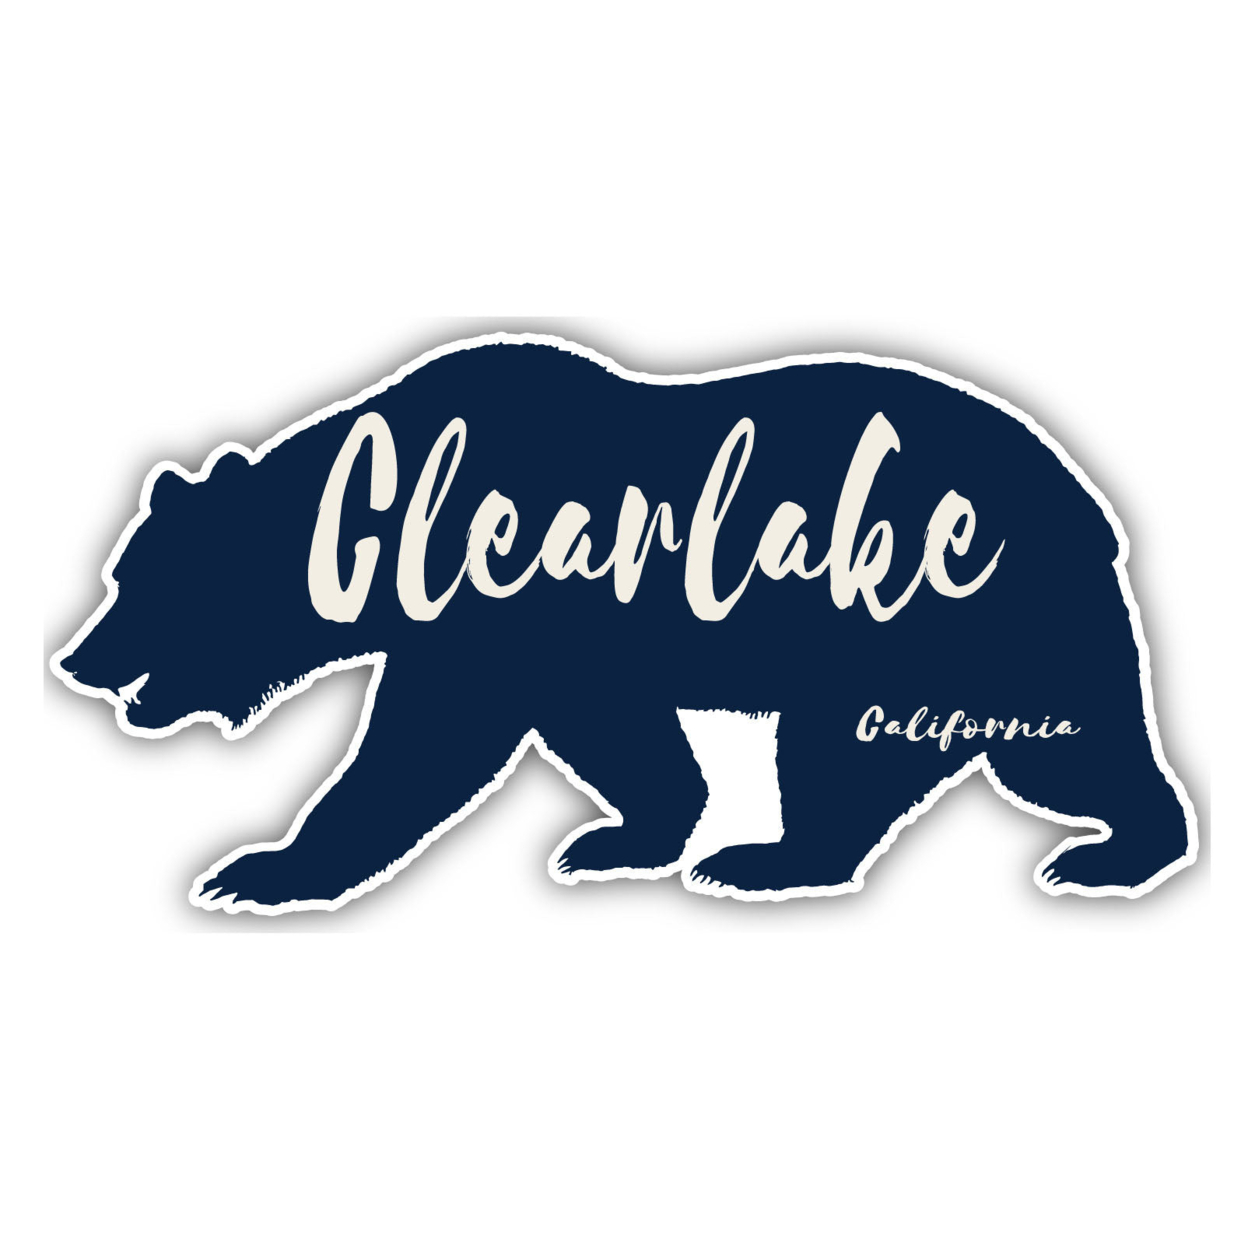 Clearlake California Souvenir Decorative Stickers (Choose Theme And Size) - 4-Pack, 2-Inch, Tent